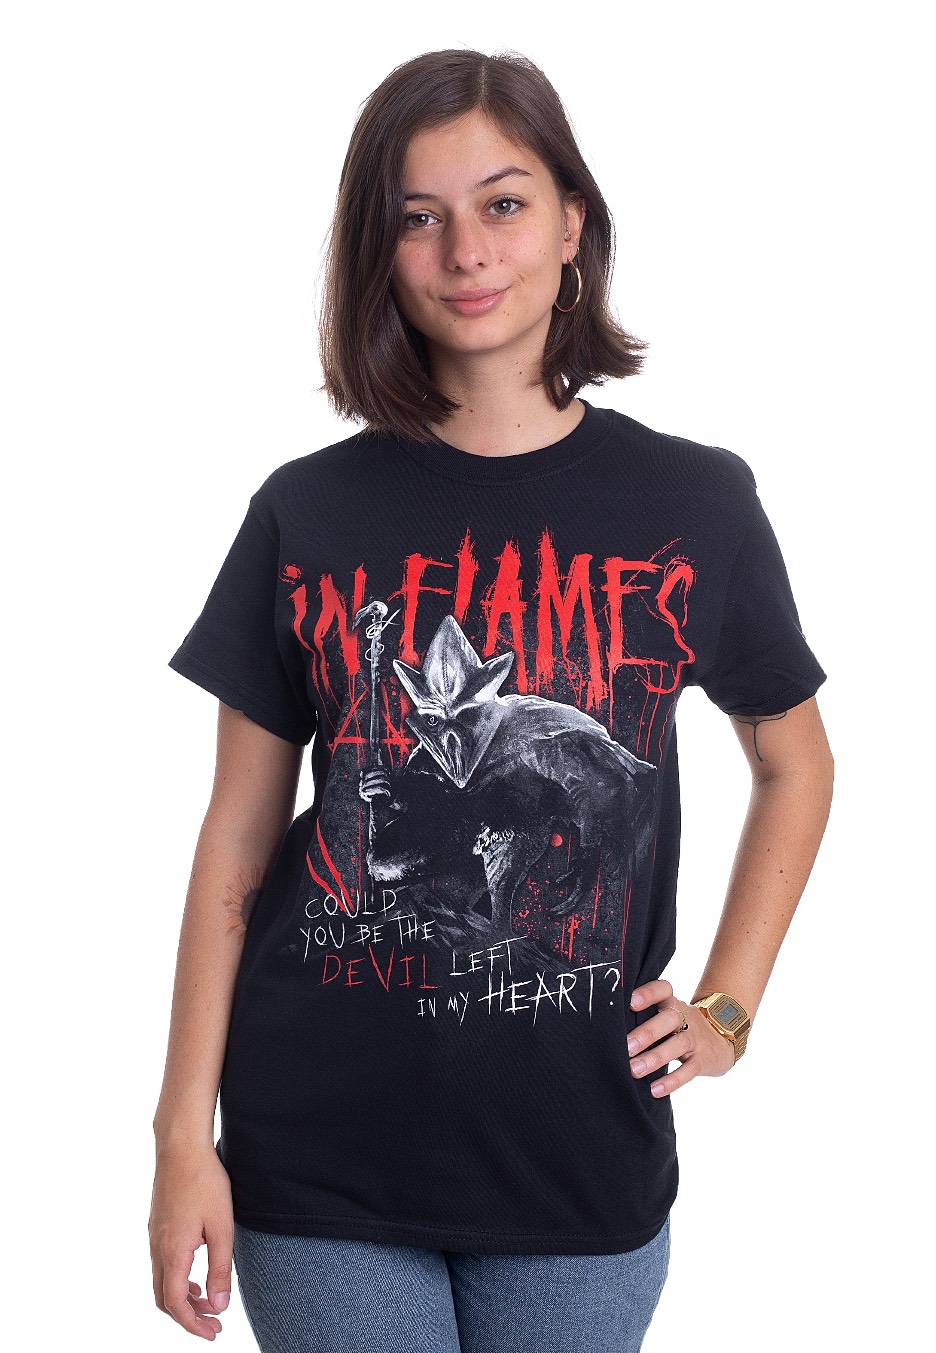 In Flames - Devil Left My Heart - - T-Shirts